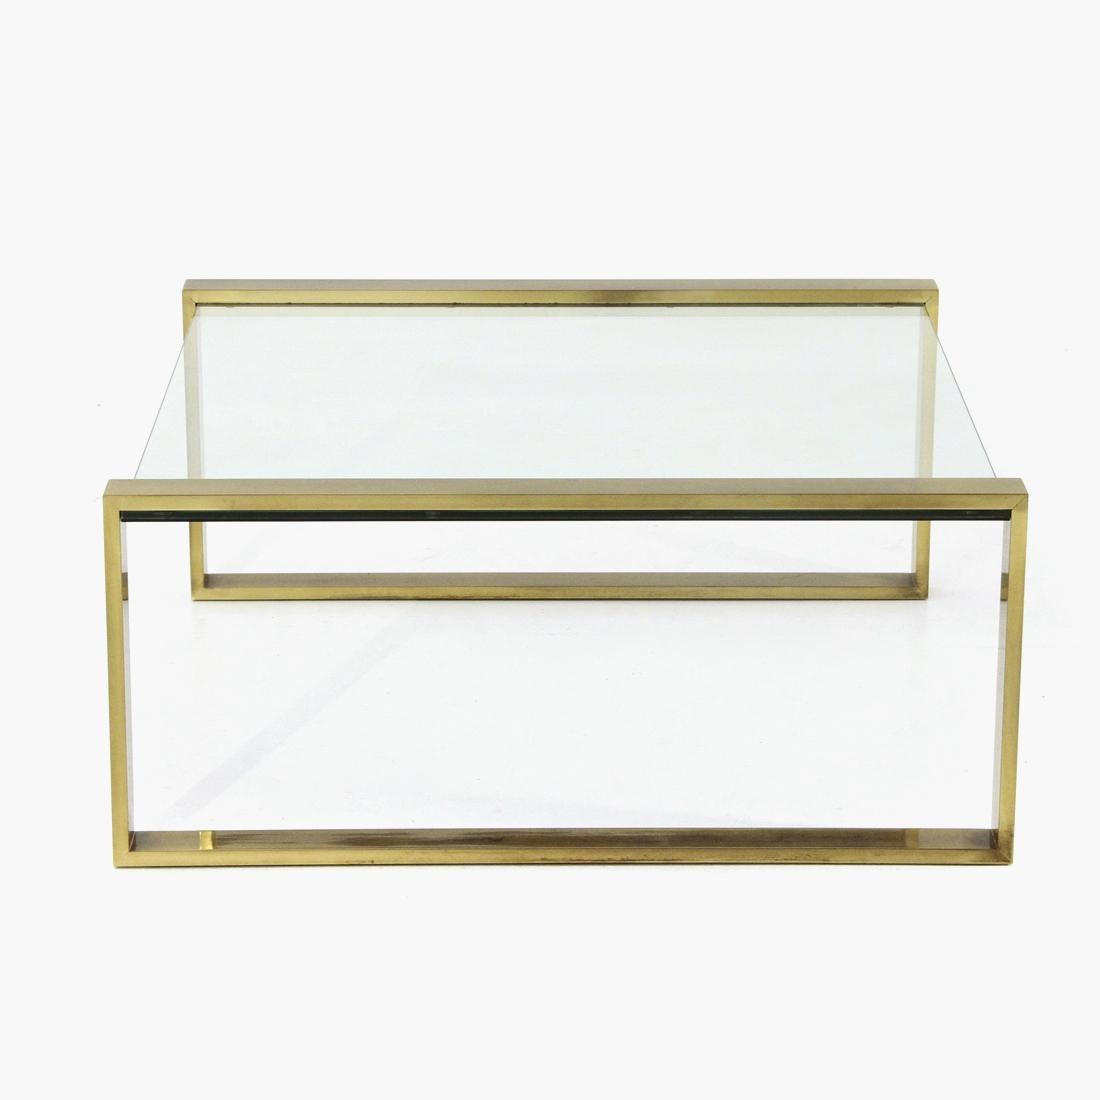 Italian-made coffee table made in the 1970s.
Side supports in brass.
Transparent glass top.
Good general conditions, some marks and halos due to normal use over time.

Dimensions: Length 80 cm, depth 83 cm, height 36 cm.
 